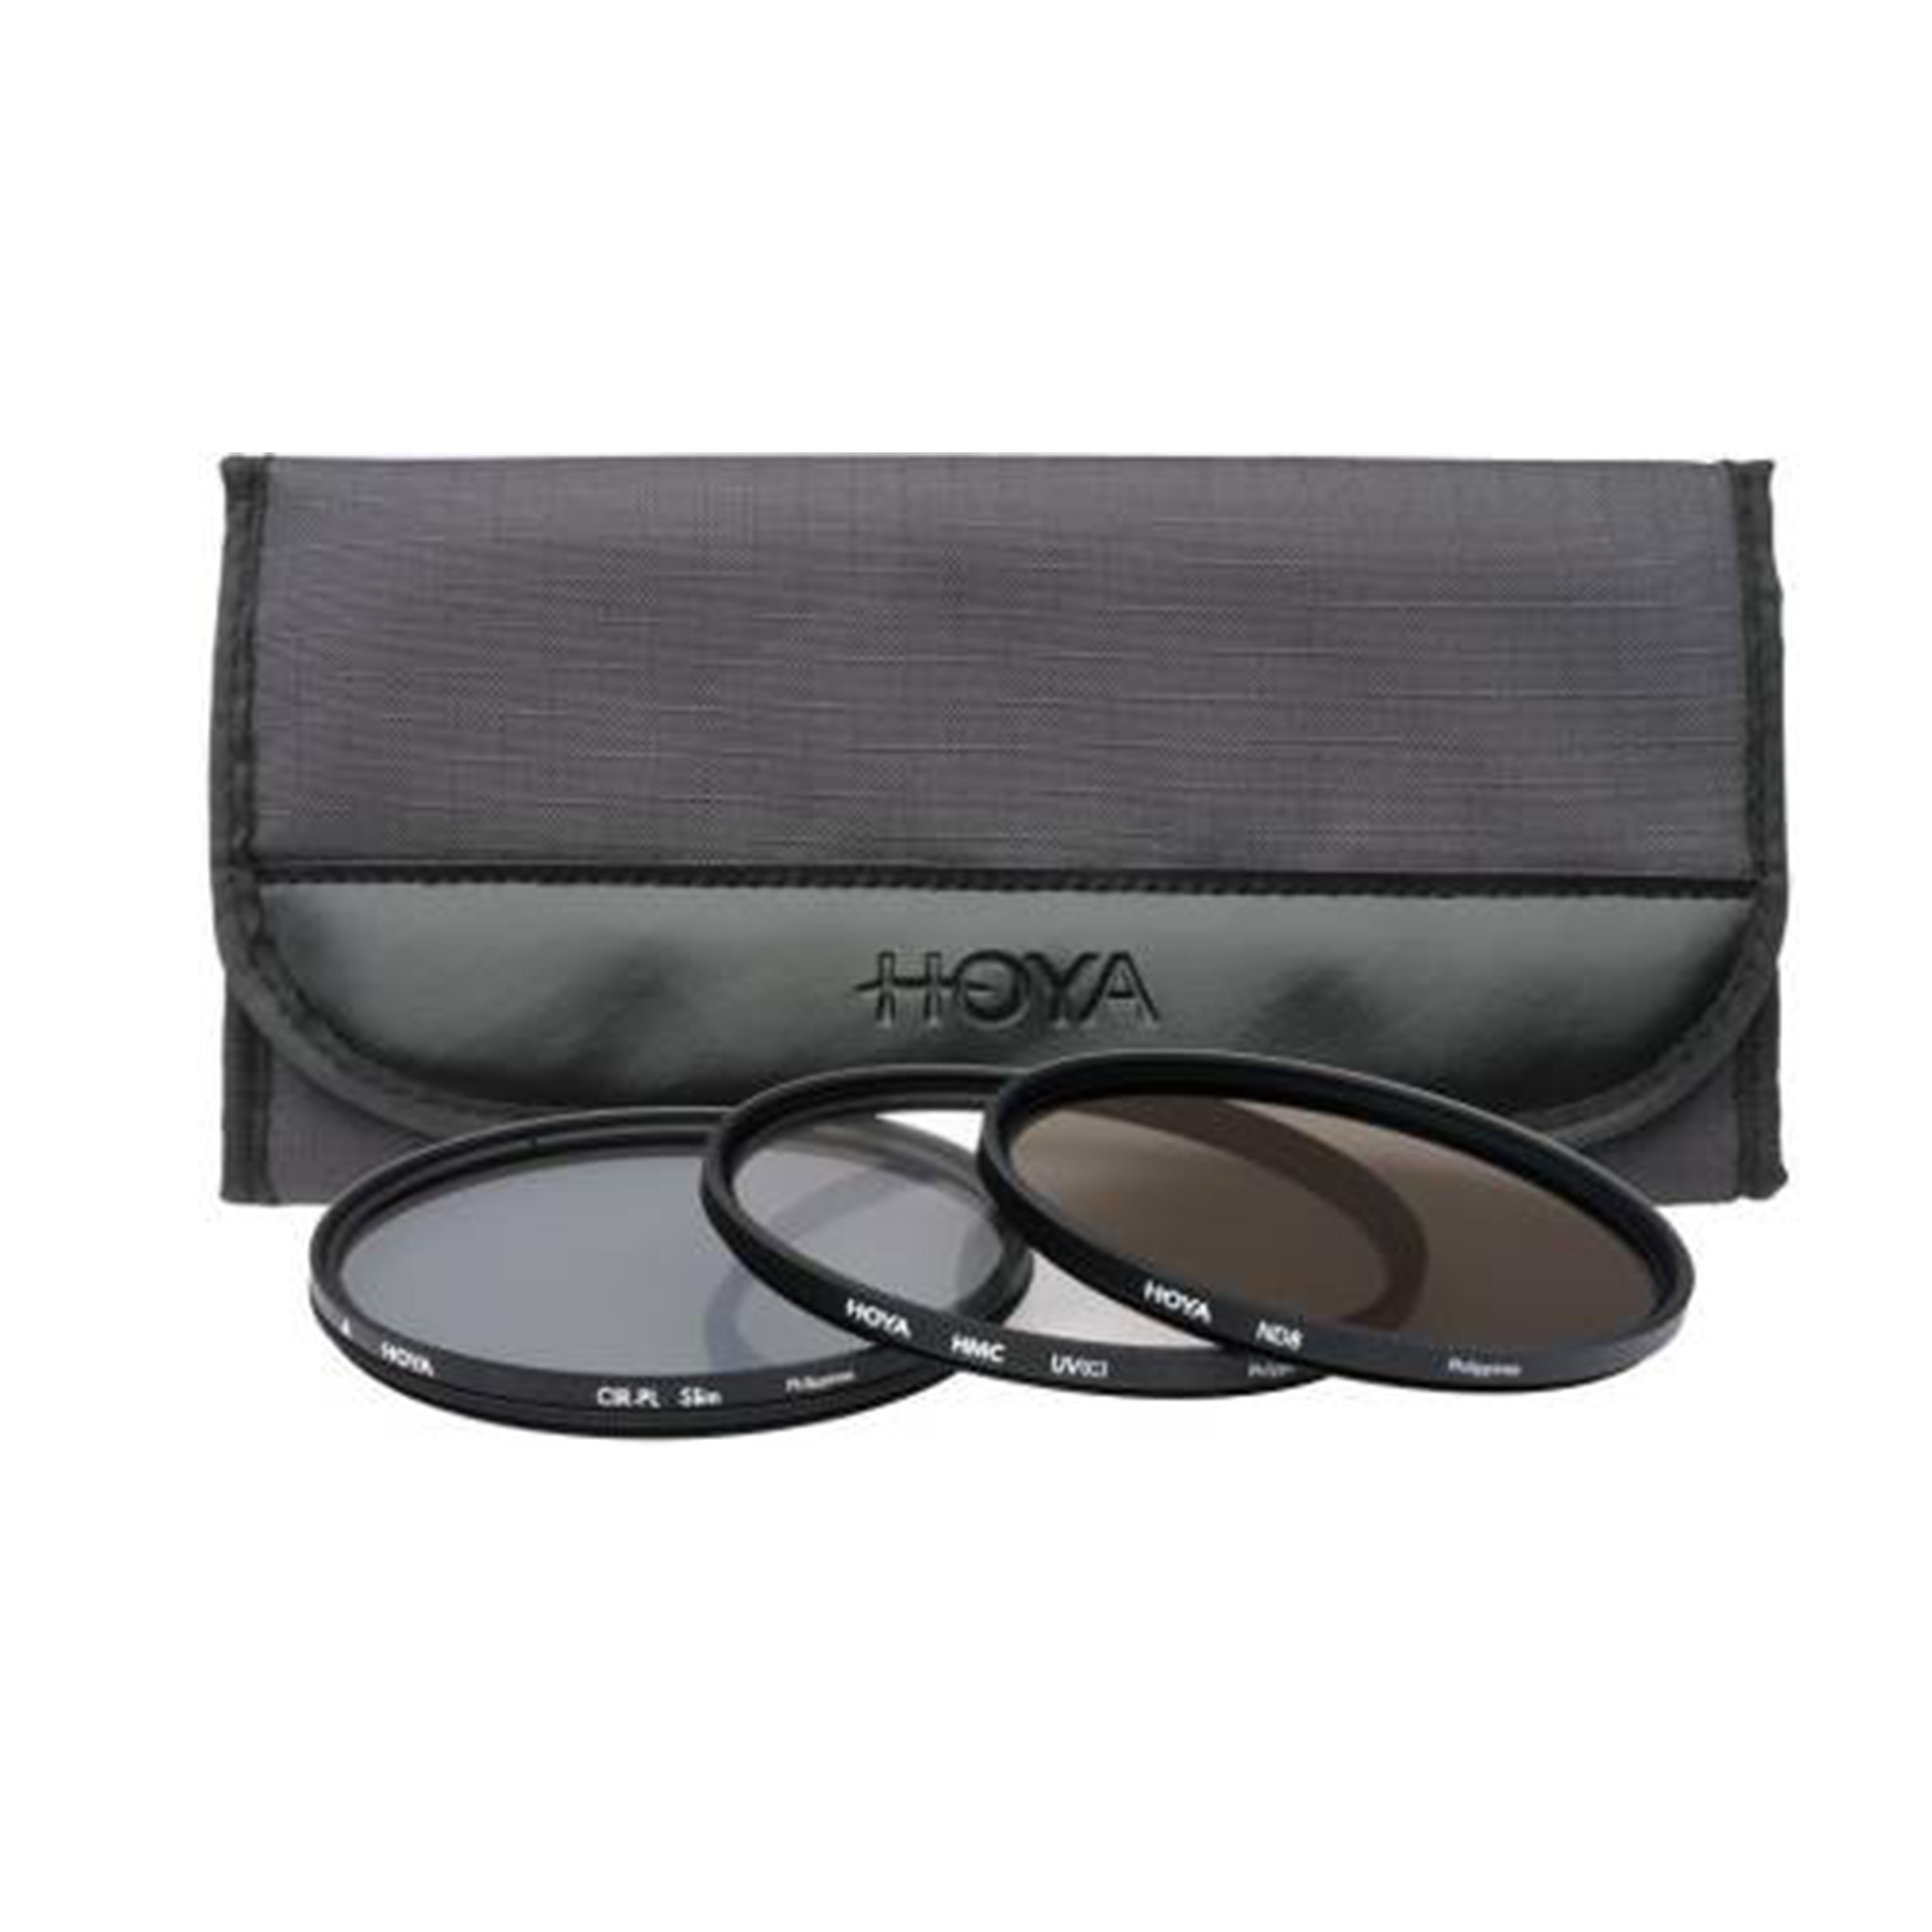 Second Hand | Hoya 55mm Lens Filter Kit with UV, CPL, ND Filter